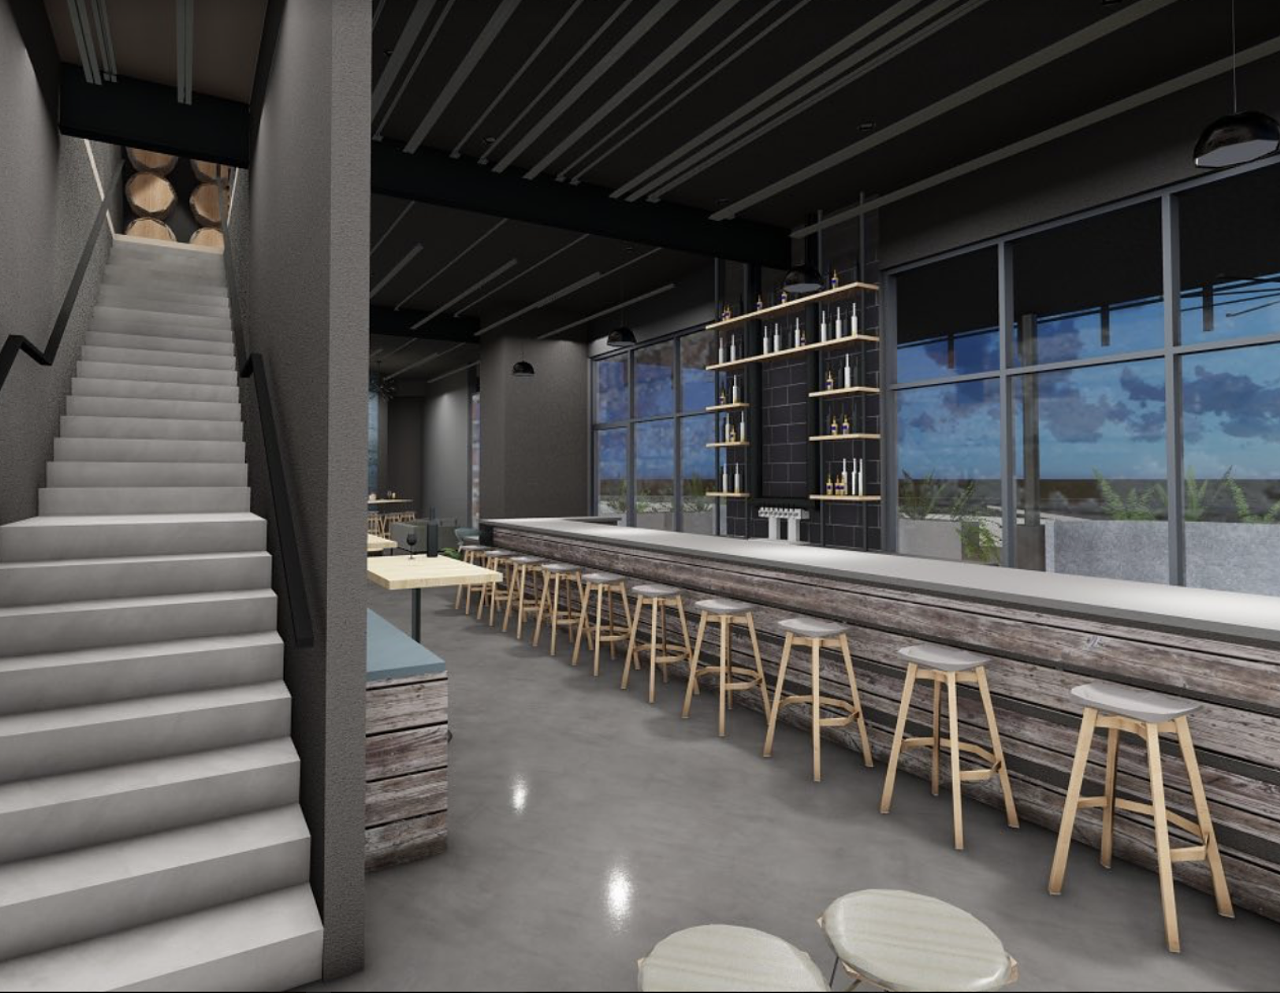 Conversa Elevated
20327 W. Interstate 10, conversaelevated.com
The dual-level bar will adhere to two dress codes: “smart casual” on the first level and cocktail attire on the second level. The two-story bar is expected to open near San Antonio’s exclusive Dominion neighborhood this fall.
Photo via Instagram / conversaelevated